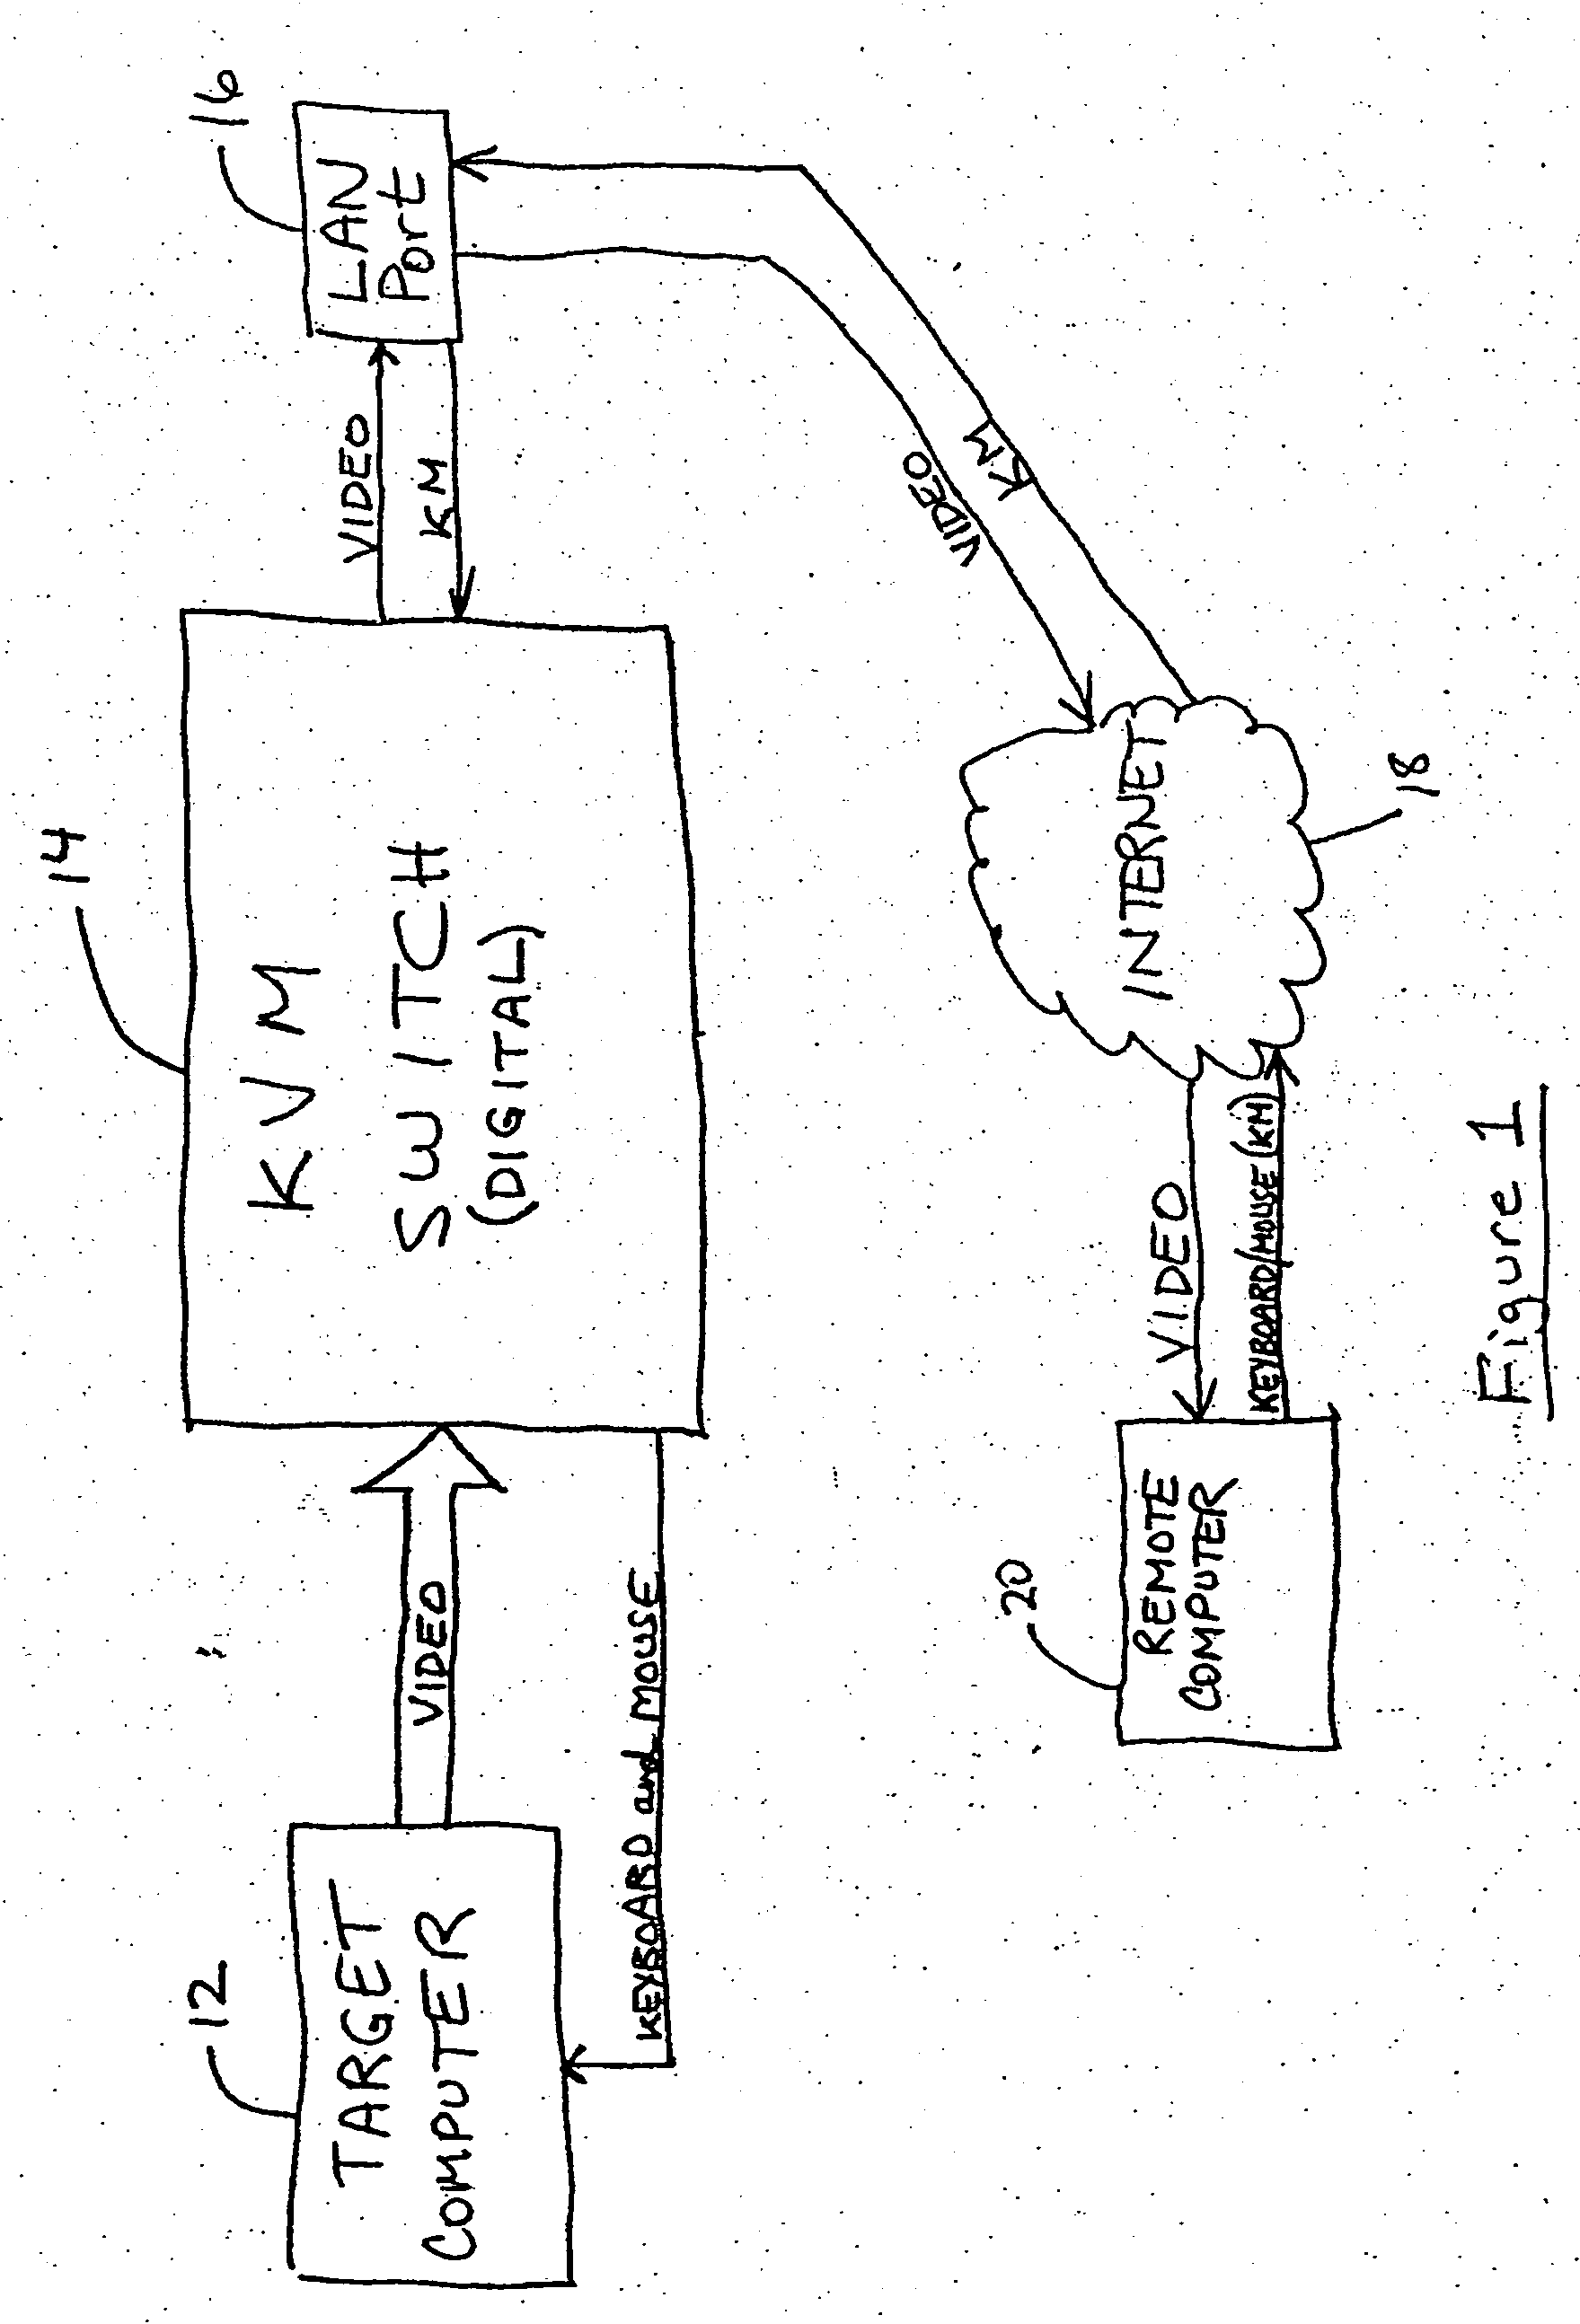 Method and apparatus for facilitating control of a target computer by a remote computer